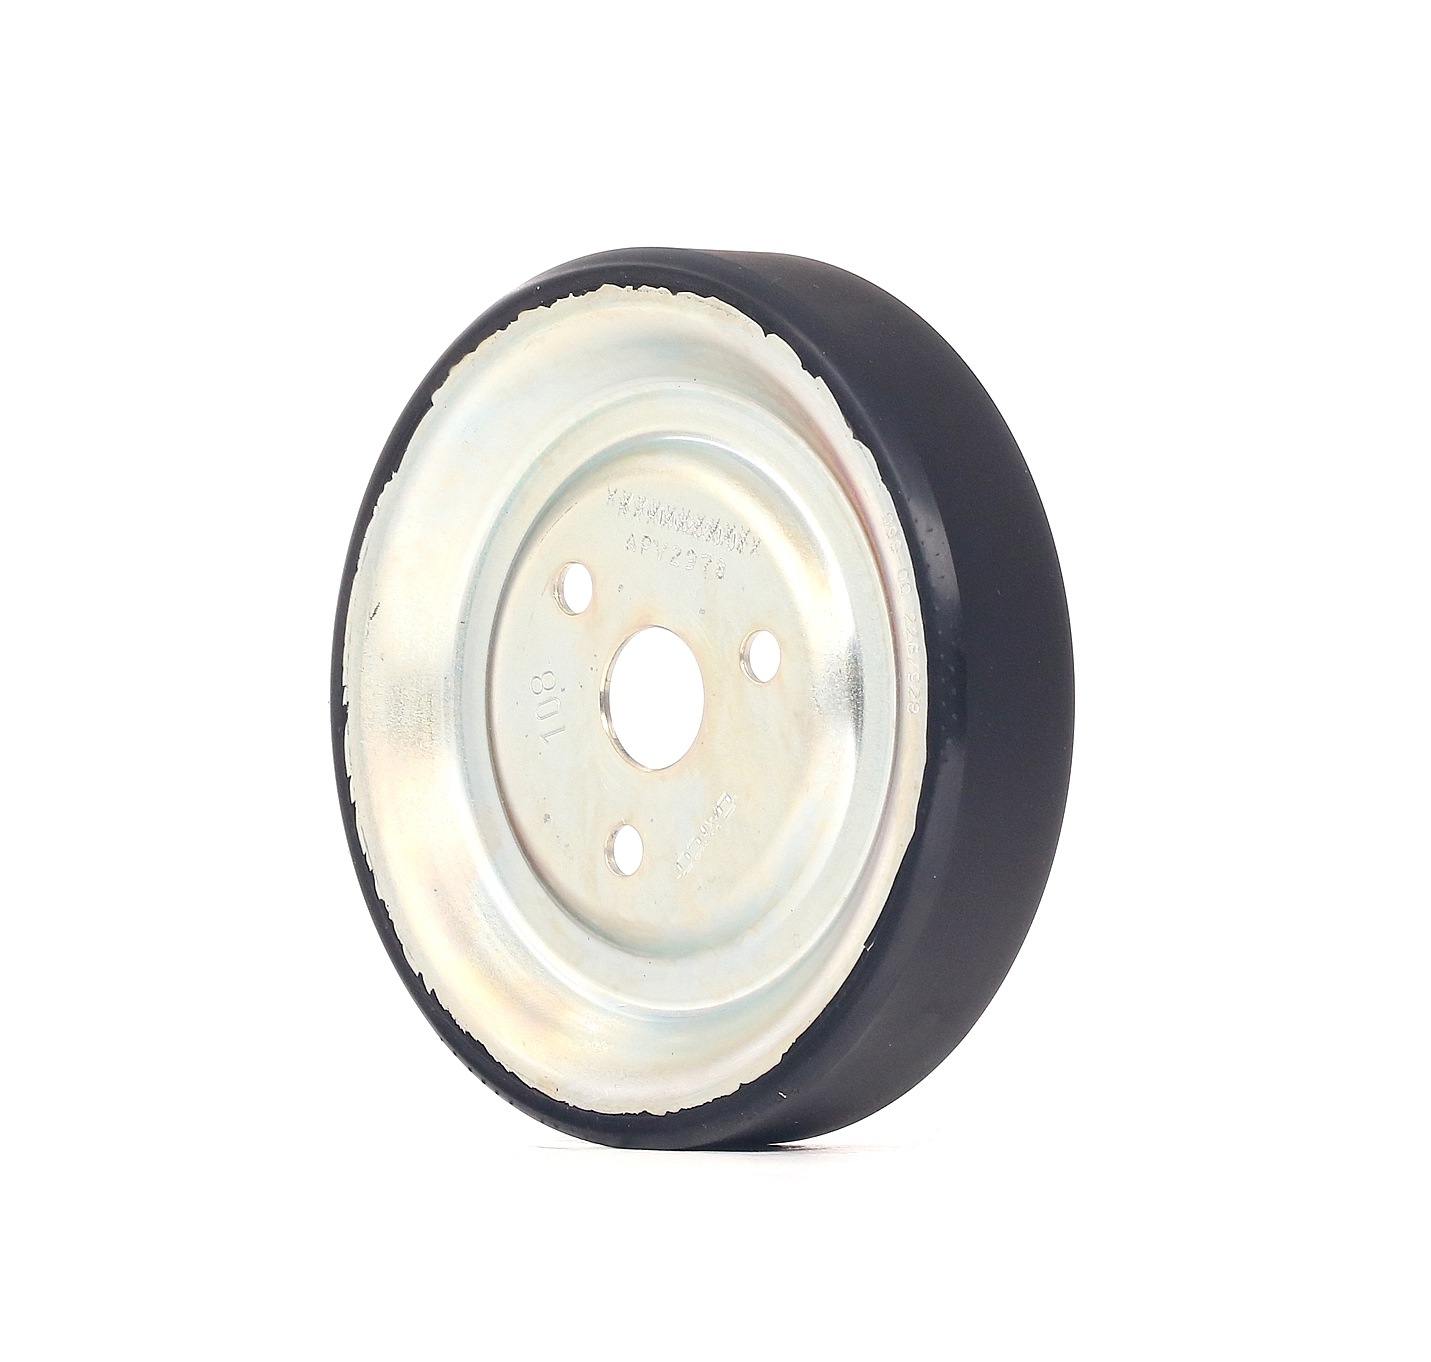 Opel Water pump pulley INA 532 0912 10 at a good price